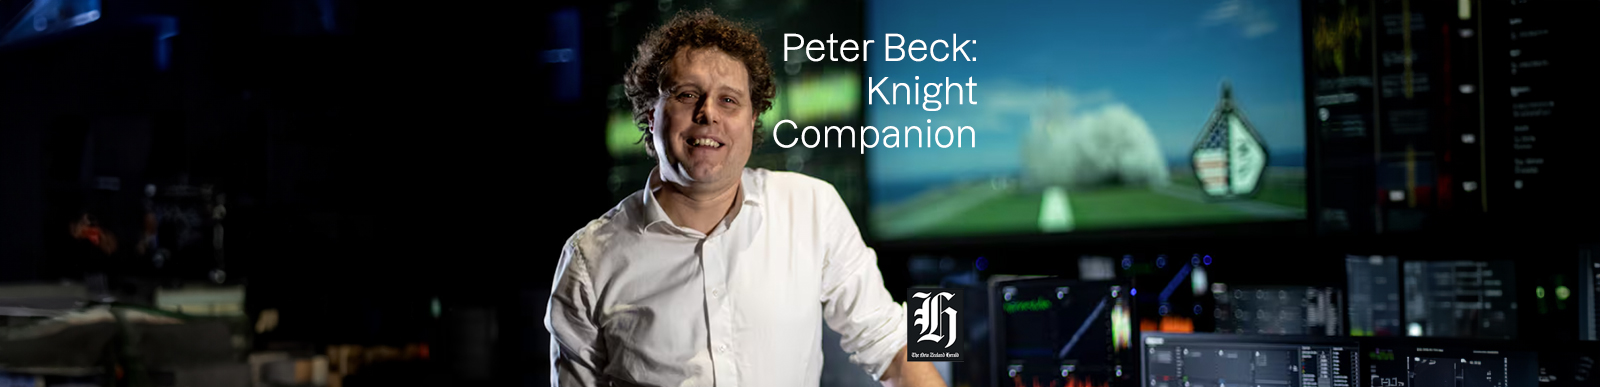 Peter Beck: Knight Companion of the New Zealand Order of Merit